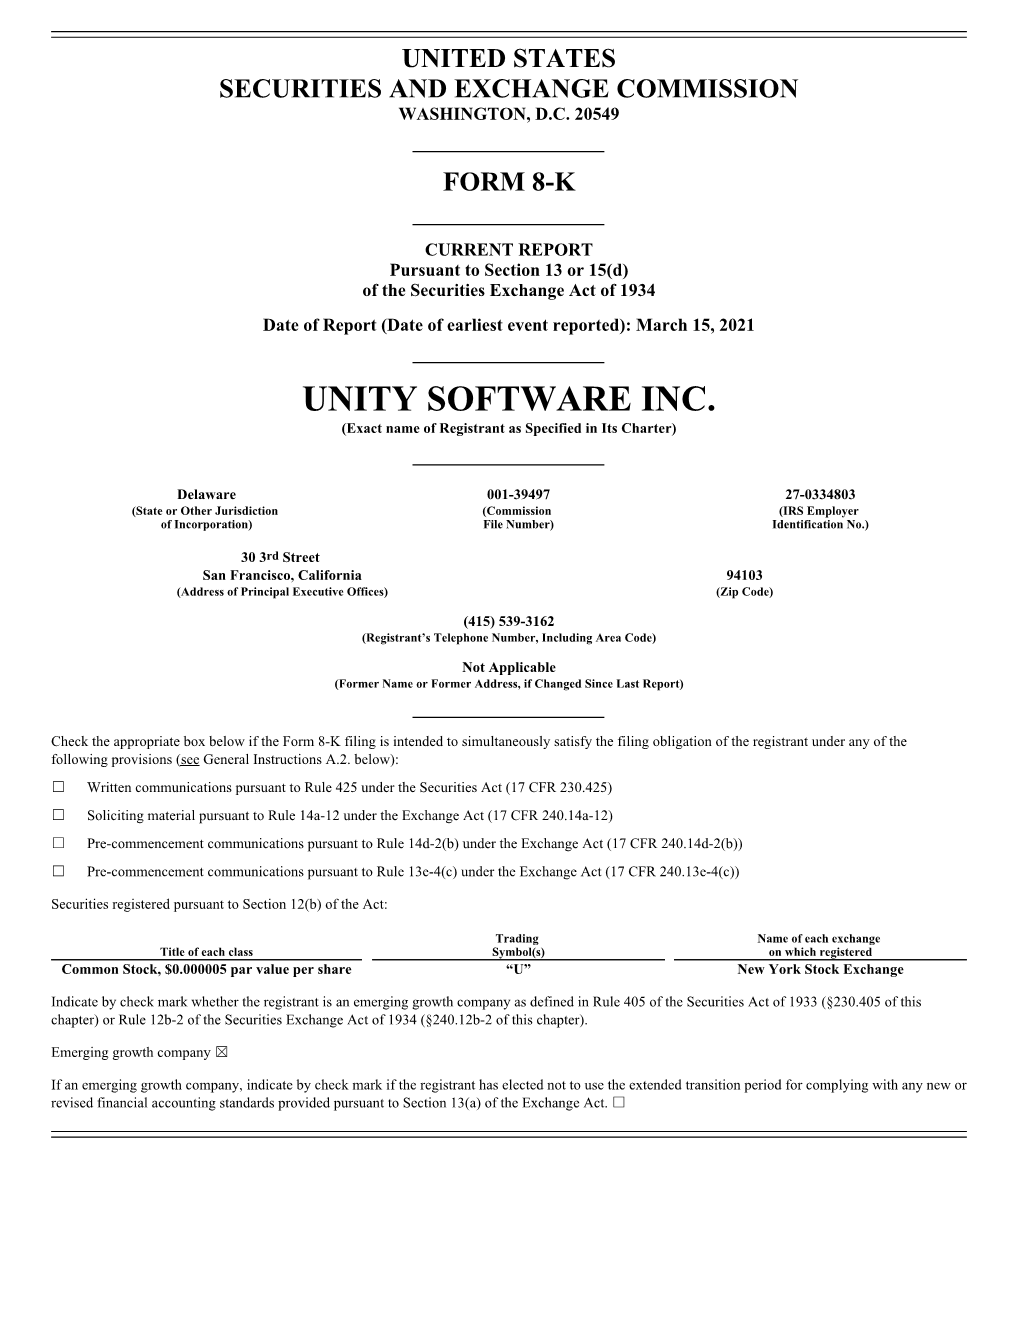 UNITY SOFTWARE INC. (Exact Name of Registrant As Specified in Its Charter)